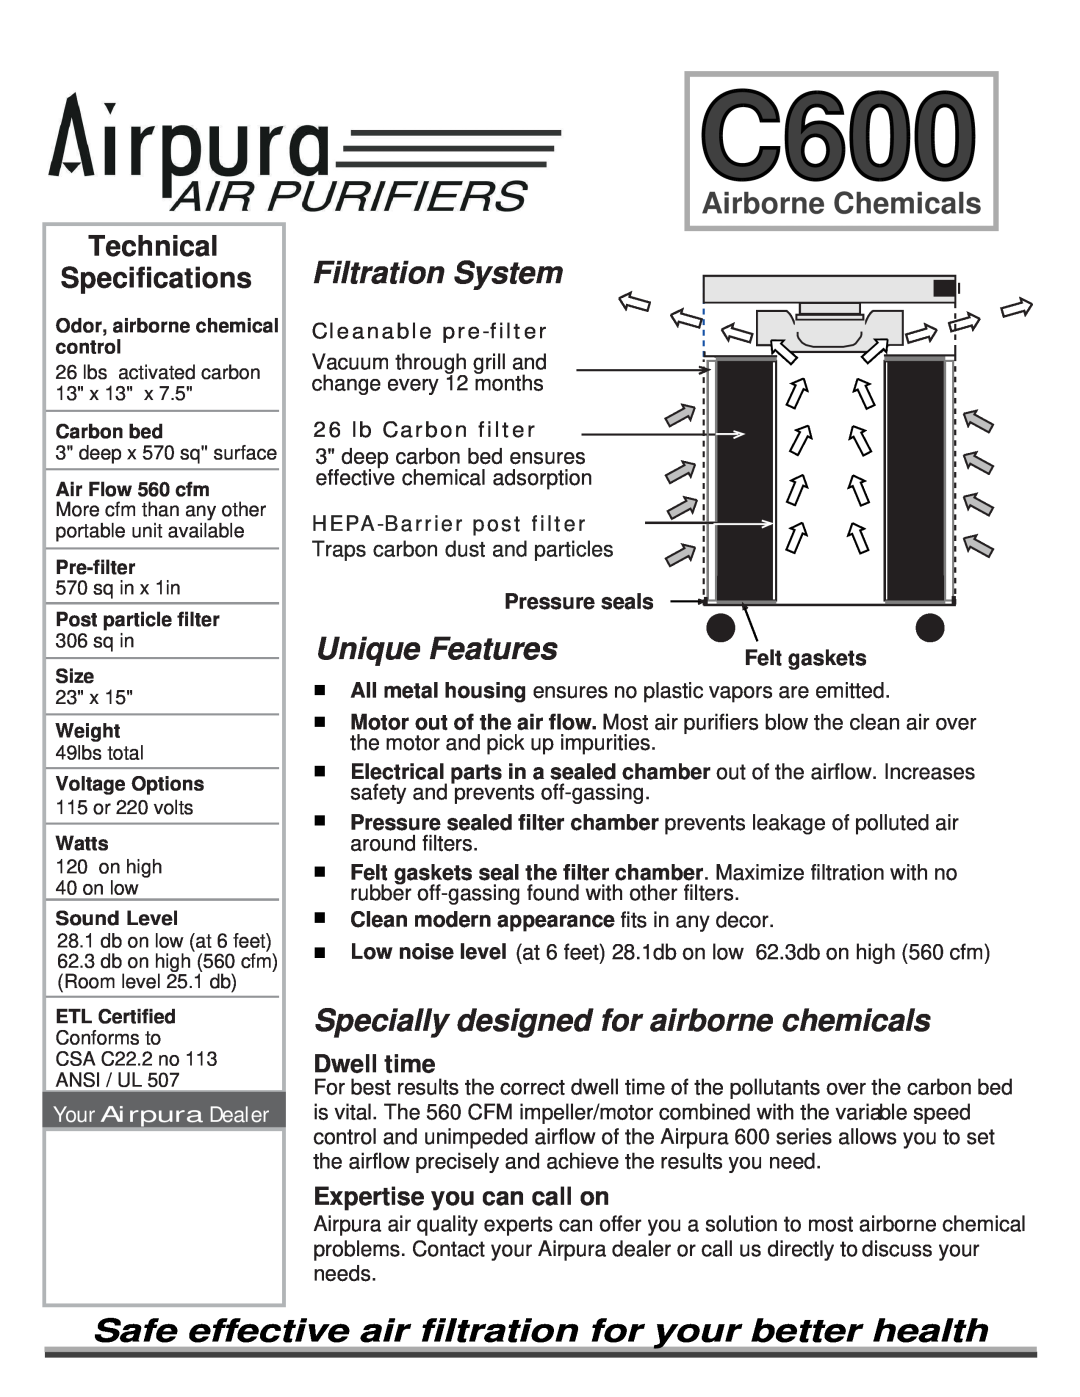 Airpura Industries C600 technical specifications Filtration System, Unique Features, Airborne Chemicals, Dwell time 